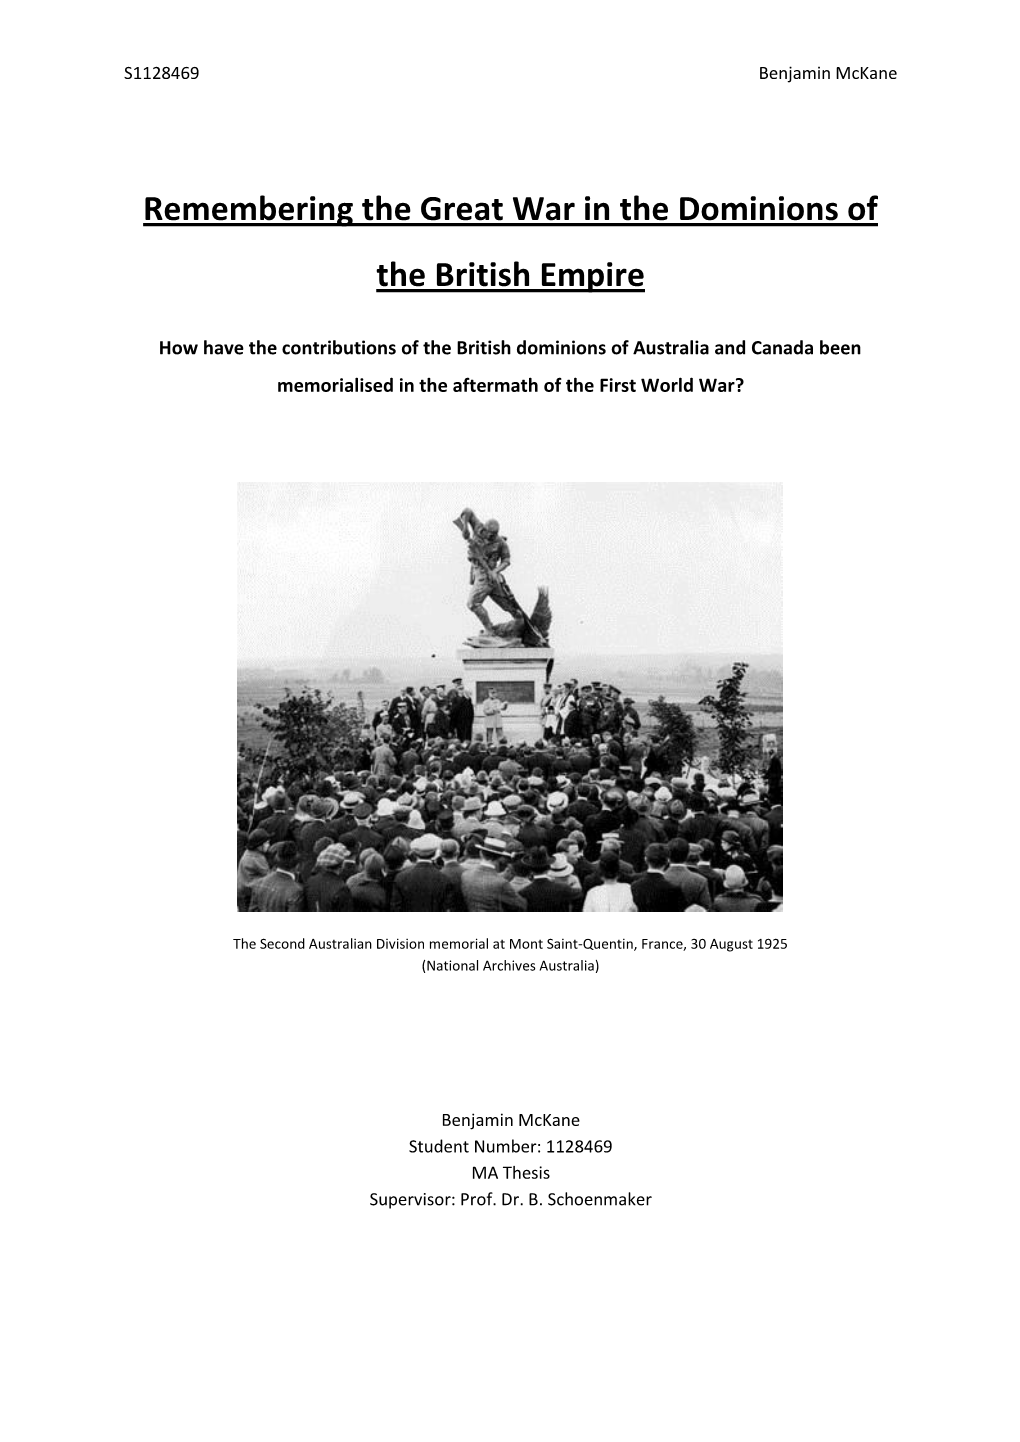 Remembering the Great War in the Dominions of the British Empire